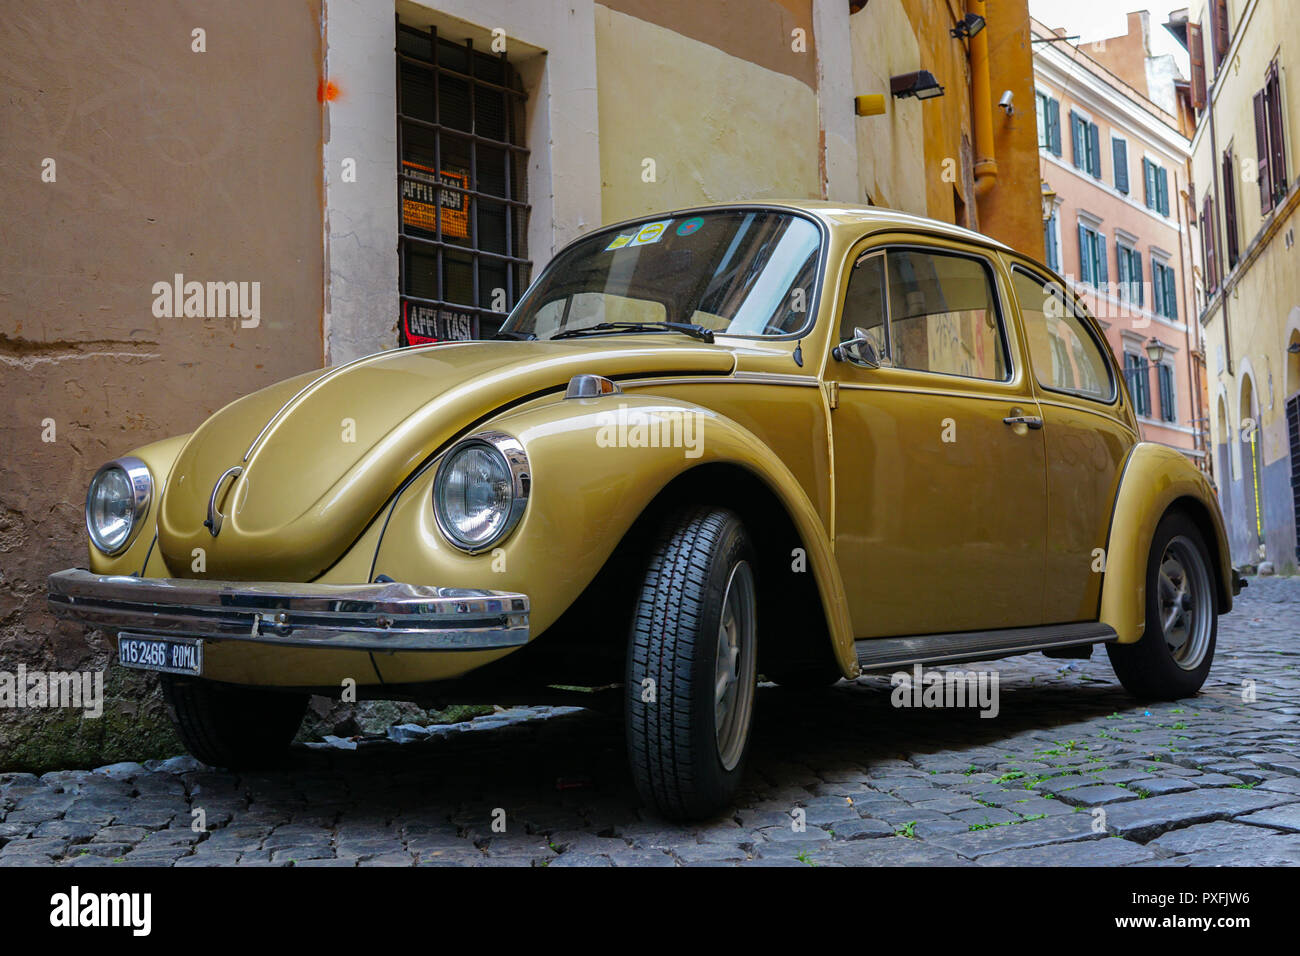 Old Volkswagen Beetle on cobbled street in Rome, Italy Stock Photo